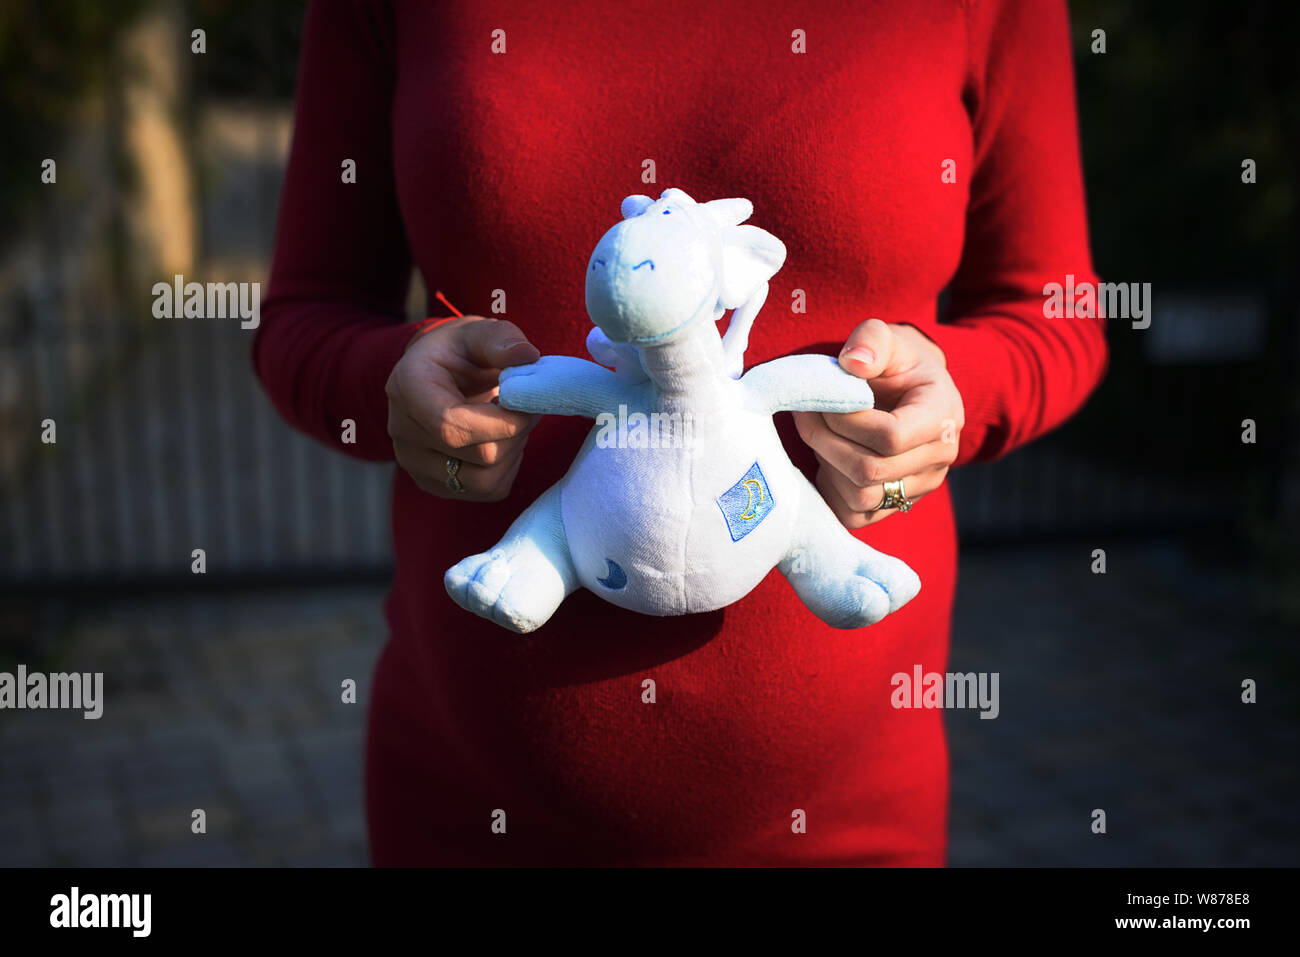 Woman in her last trimester of pregnancy wearing a red jersey dress and holding a cute blue dinosaur plush toy revealing the gender of the baby as boy Stock Photo